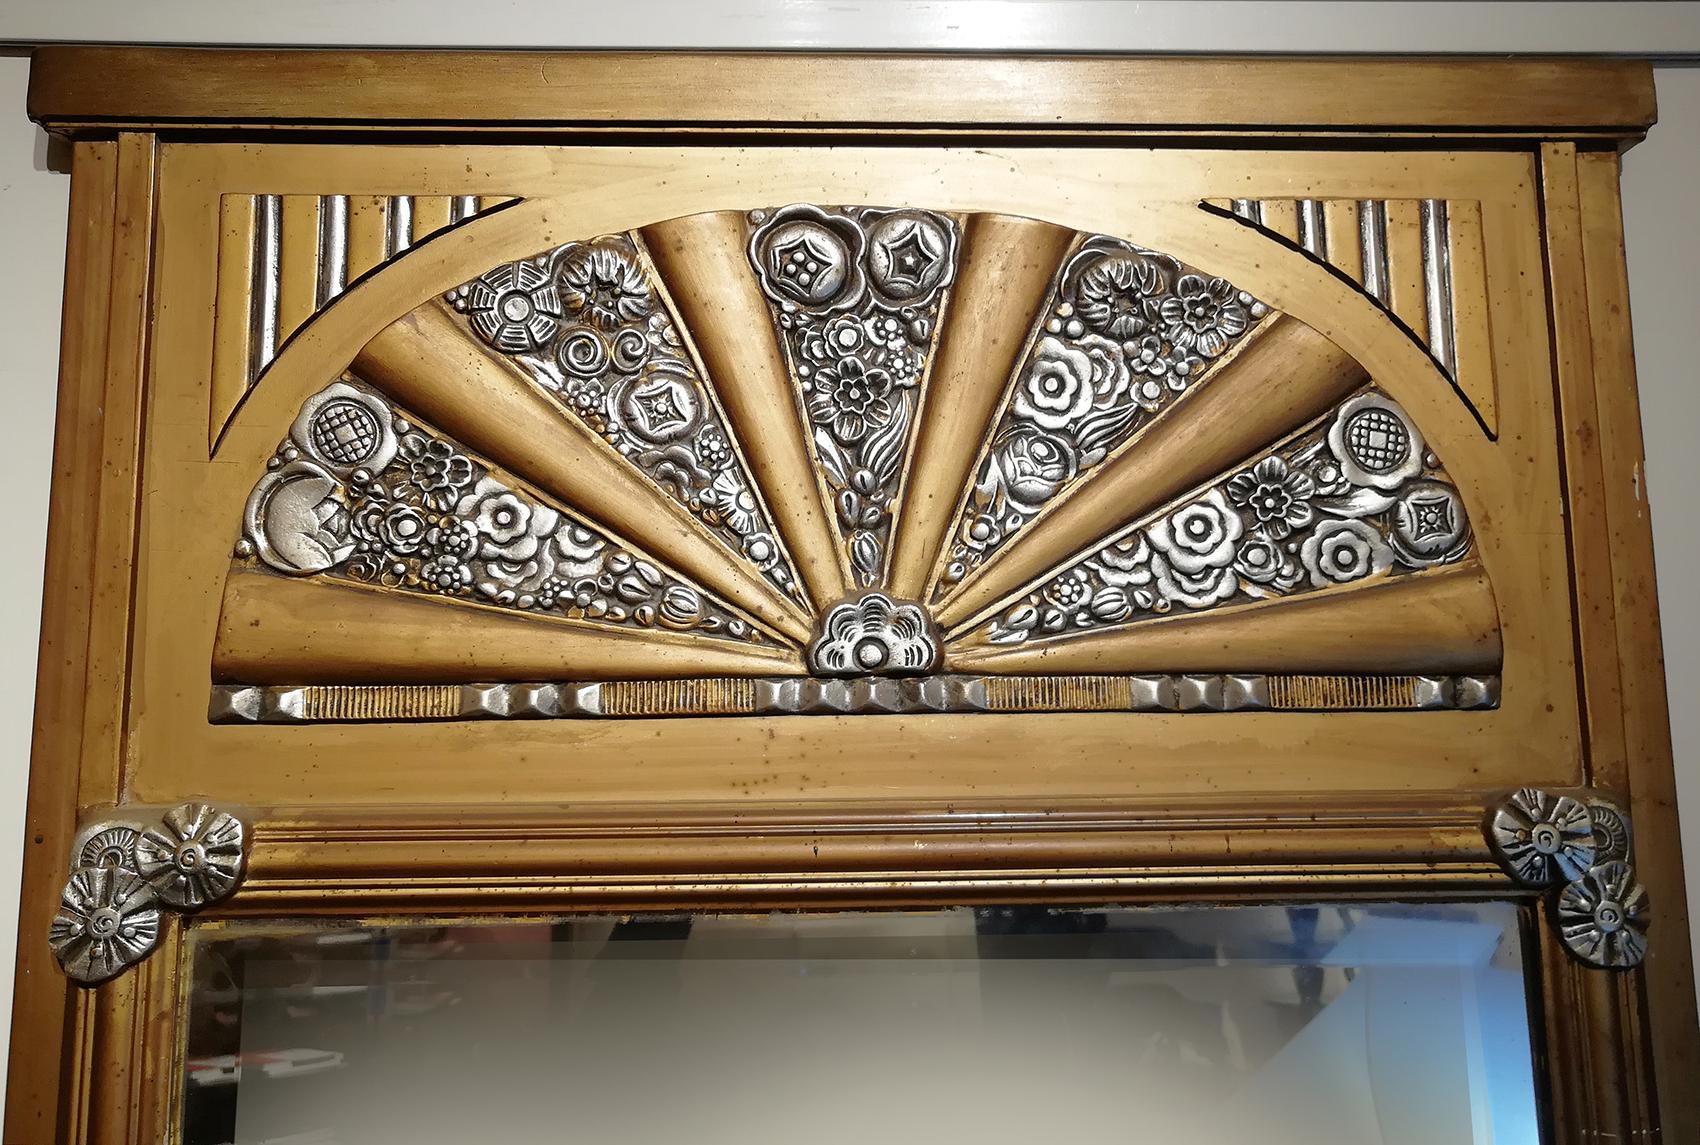 French Art Deco Mirror in gilded wood circa 1930 with beveled mirror showing a floral silver motif design on the upper side.